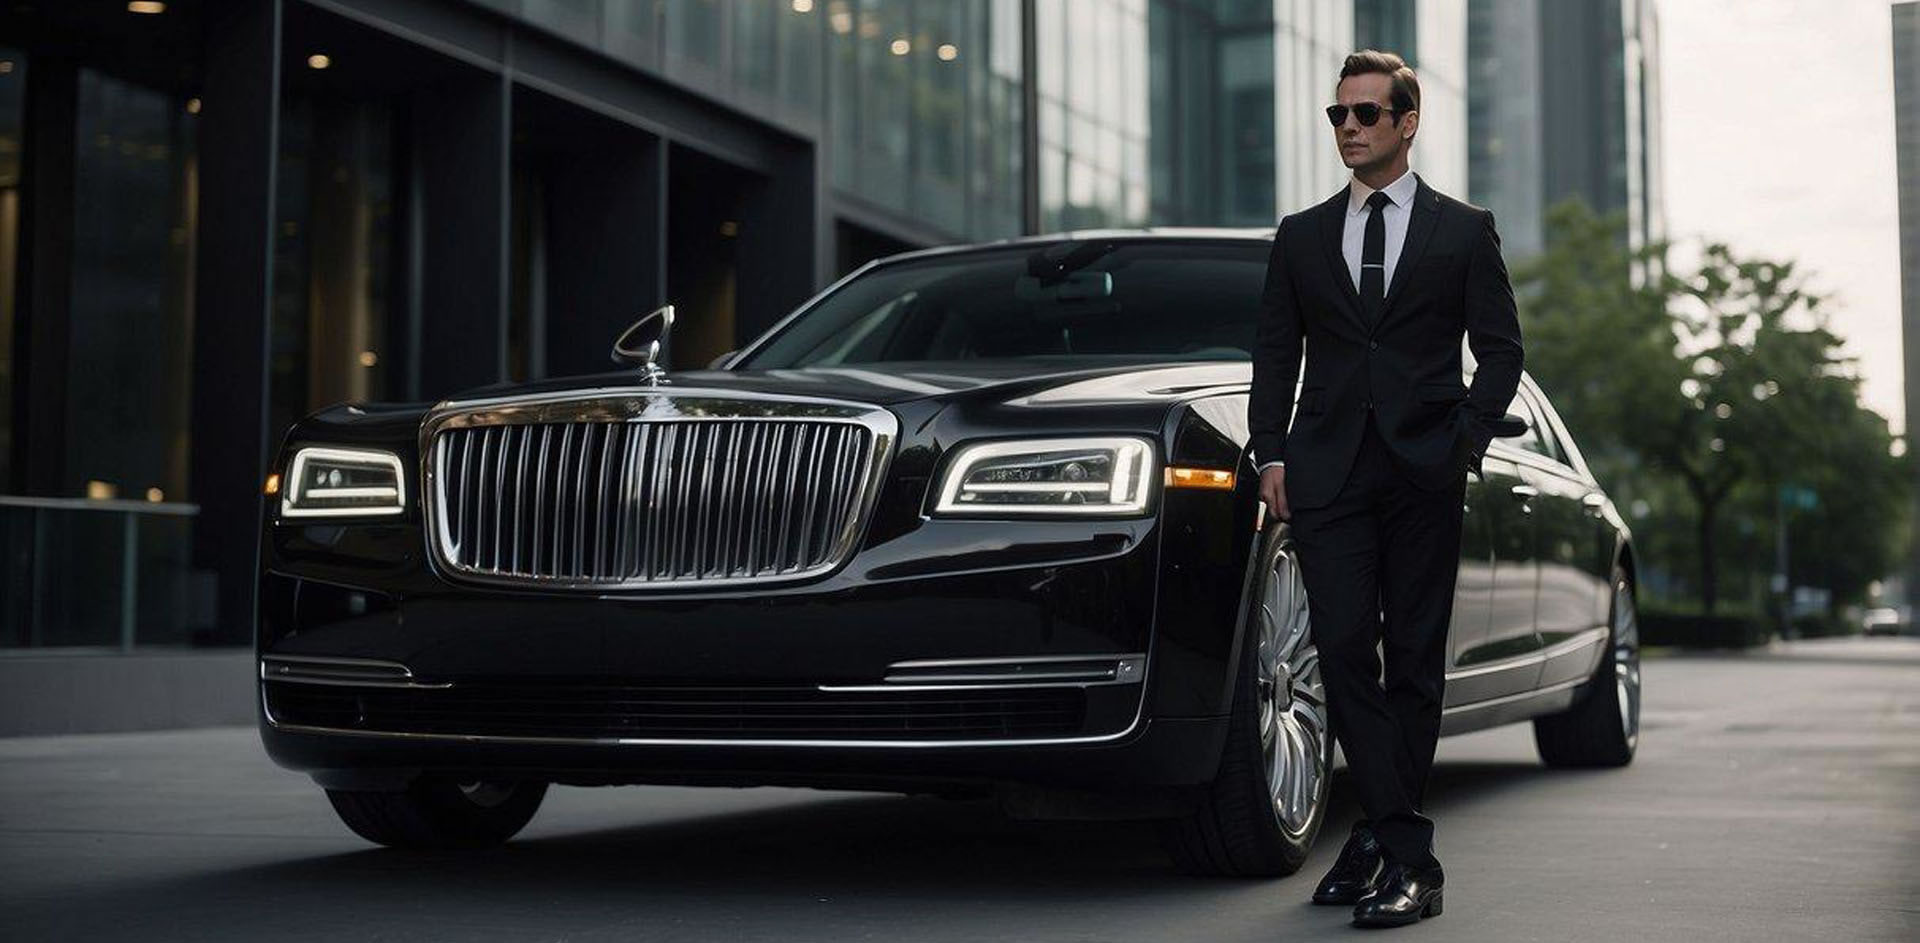 A sleek black limousine pulls up to a modern office building, reflecting the city skyline in its polished exterior. A chauffeur stands by the open door, ready to assist corporate clients